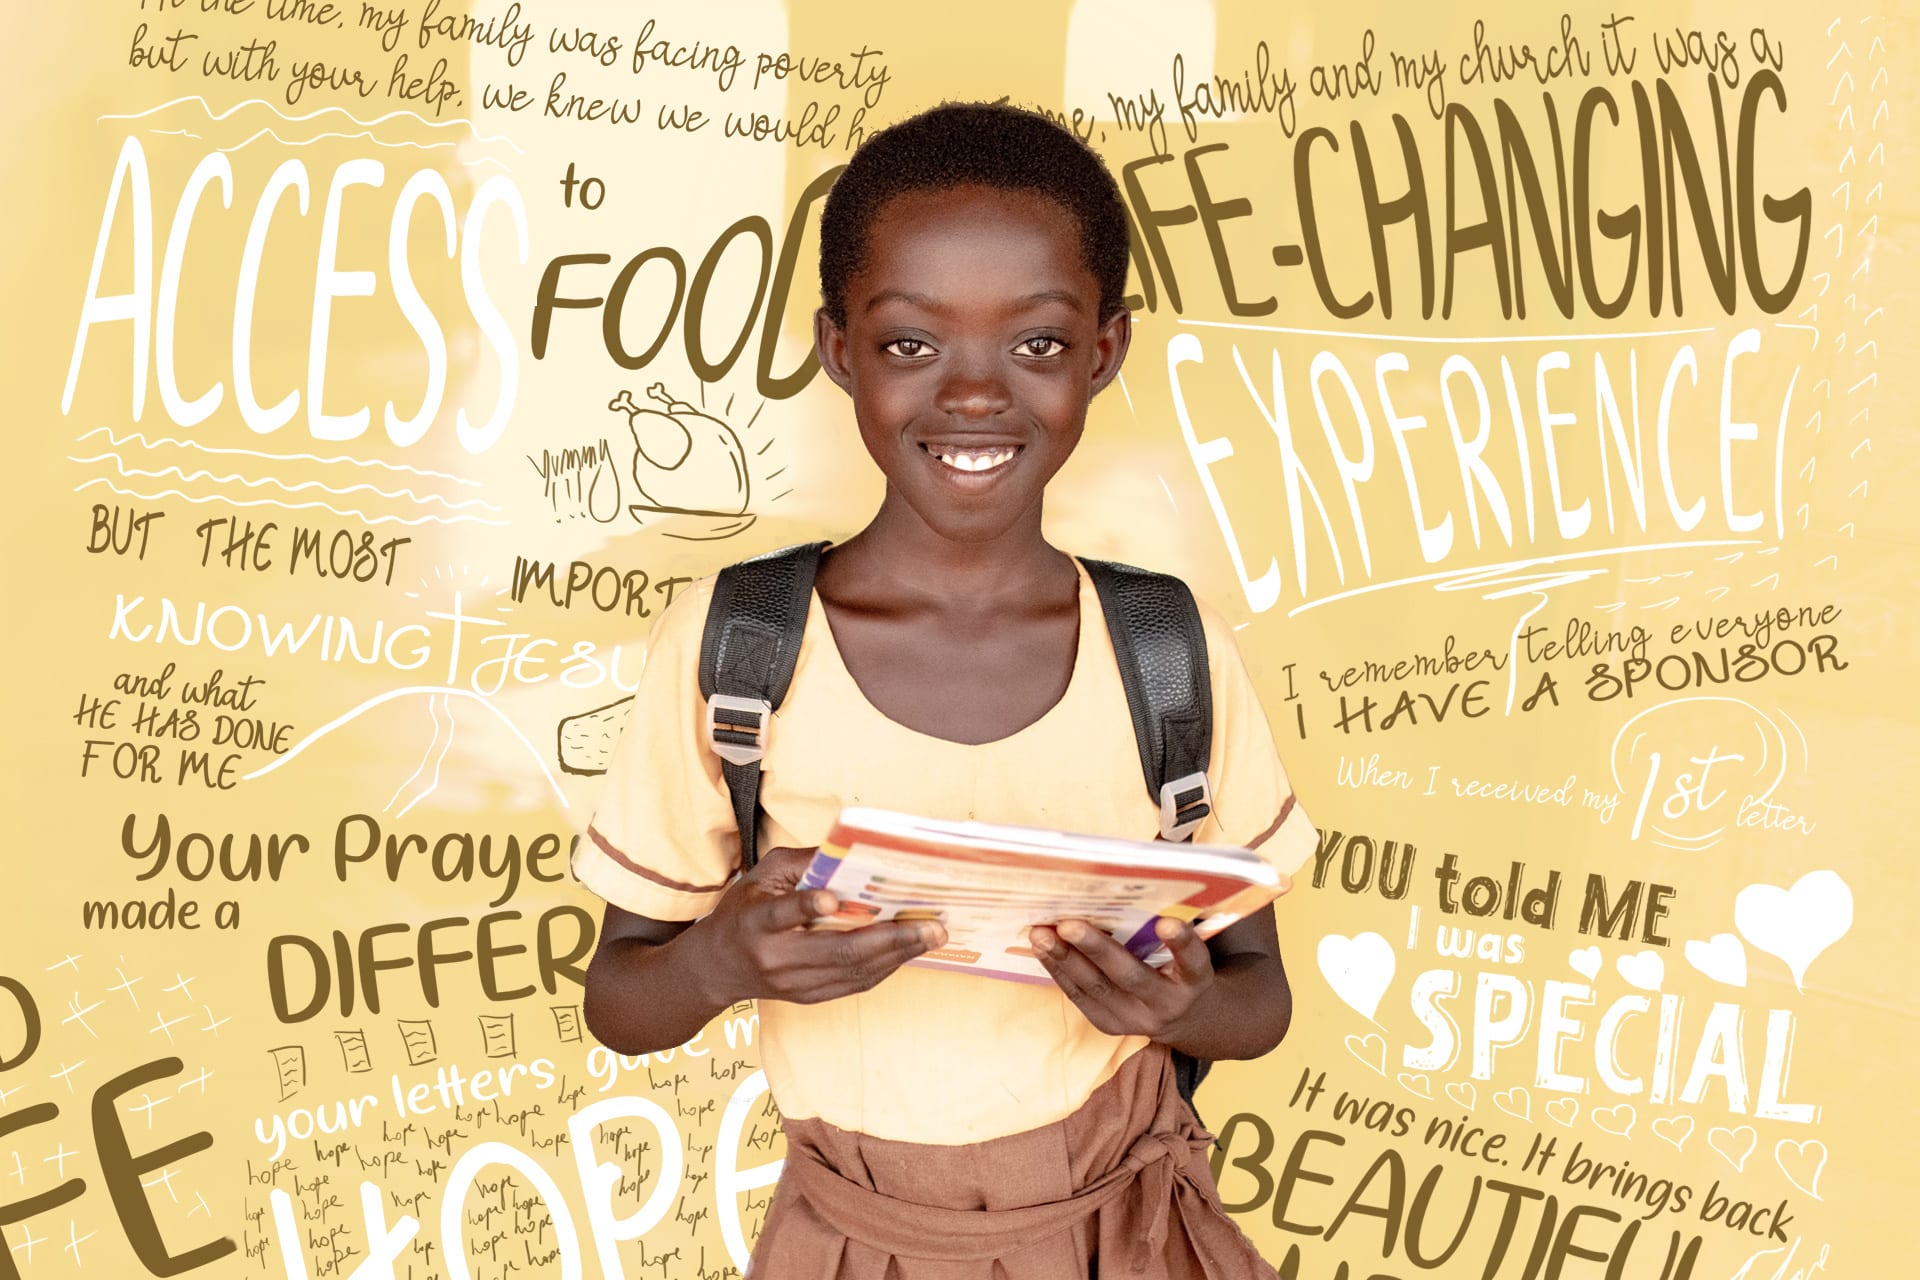 A graphic that has an image of a pre-teen girl in Ghana wearing a yellow t-shirt, backpack and holding books. Behind her is a yellow background with excerpts of quotes from Compassion alumni, such as "access to food" and "life-changing experience".